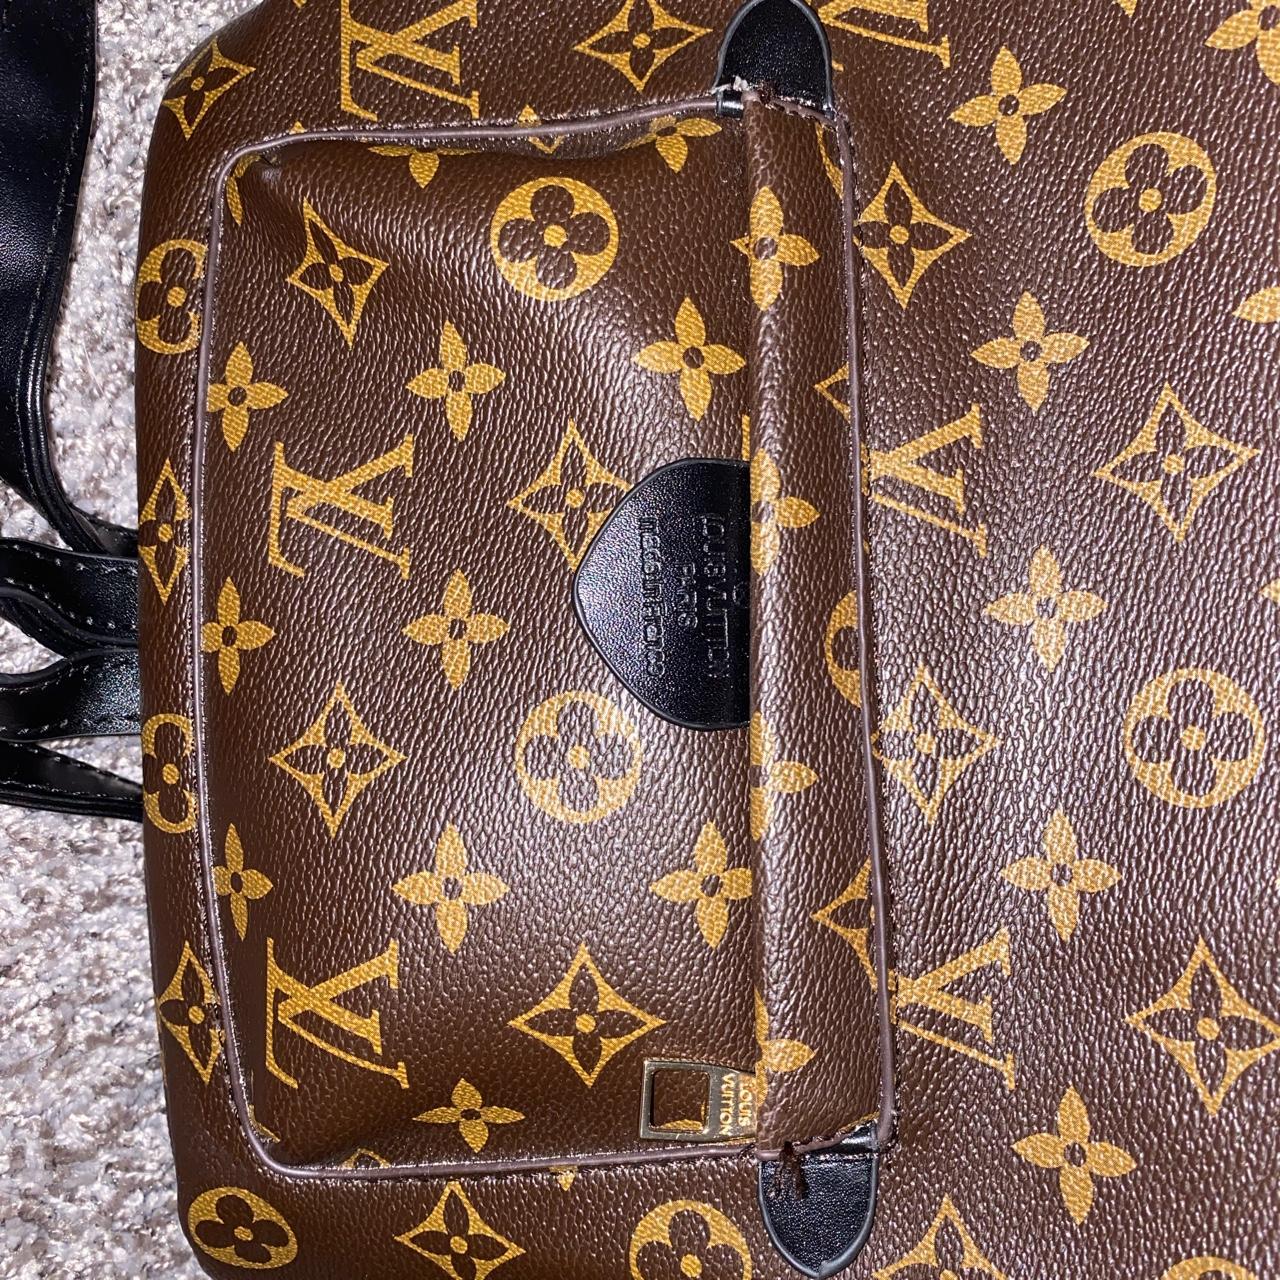 Free shipping! Louis Vuitton Bosphore backpack. Very - Depop